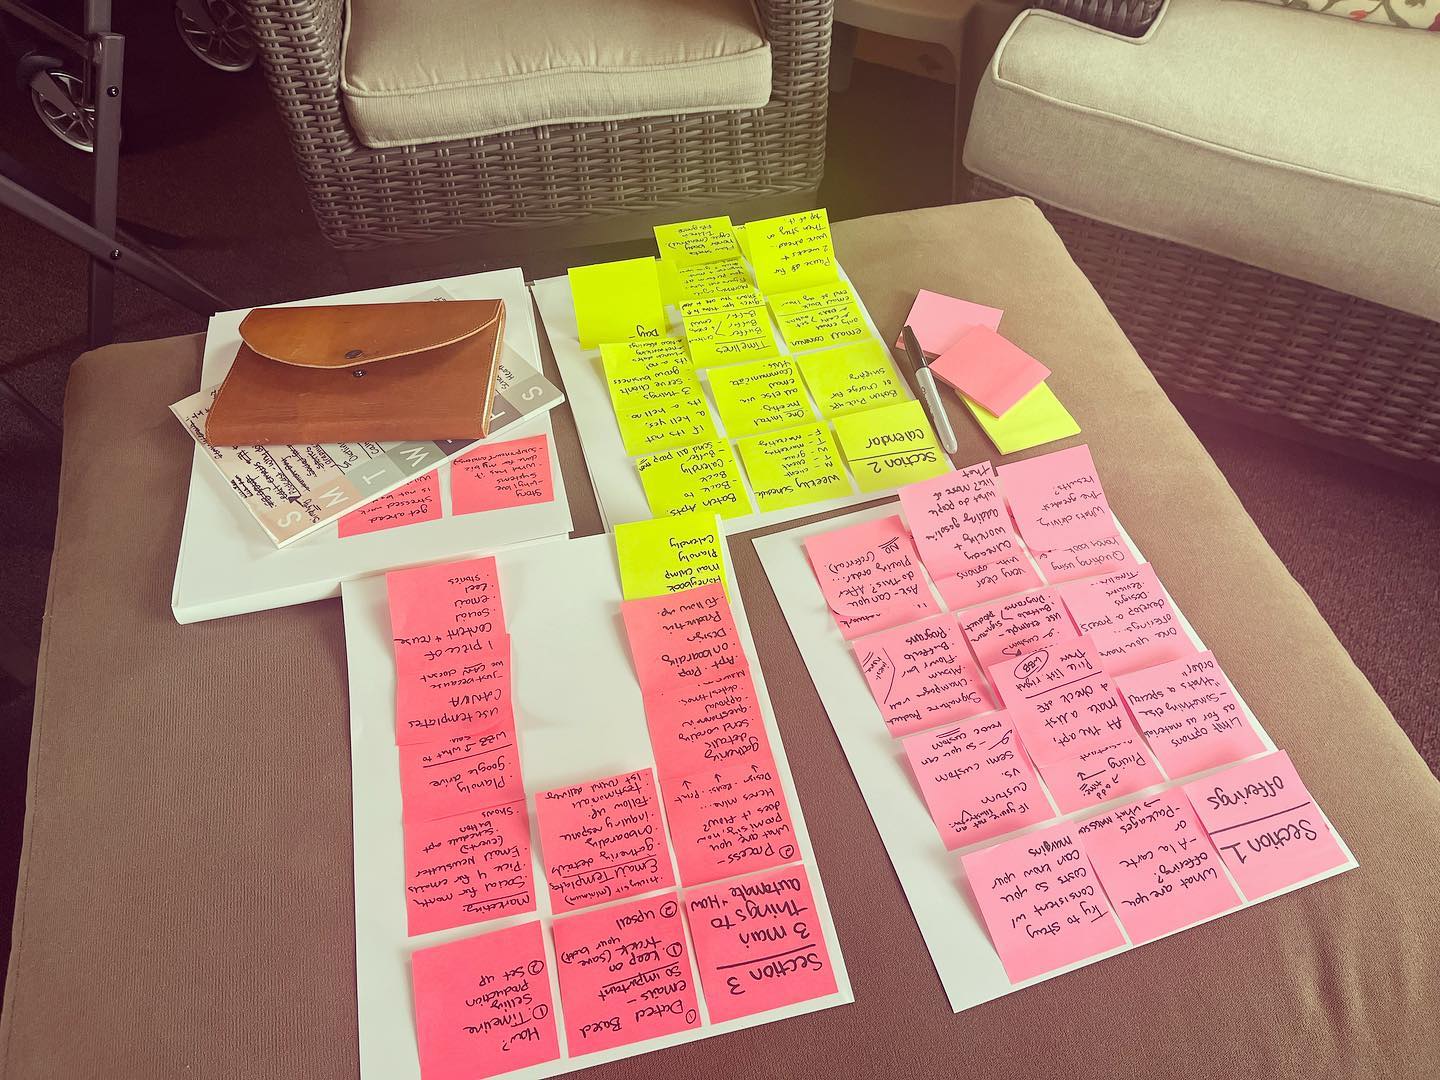 My process for every training I do! From workshops, to courses, to masterclasses - I brainstorm with post-it notes and narrow down the most important/relevant tips. It’s a fun break from the computer 🤓

I’m finalizing the content for Monday’s workshop now and I’d love to hear from you - what do you want to learn about streamlining, simplifying, and automating your business? 

Tell me below and I’ll make a post-it for it! 👇🏻

PS: You can learn more about the workshop and register at the link in our bio!